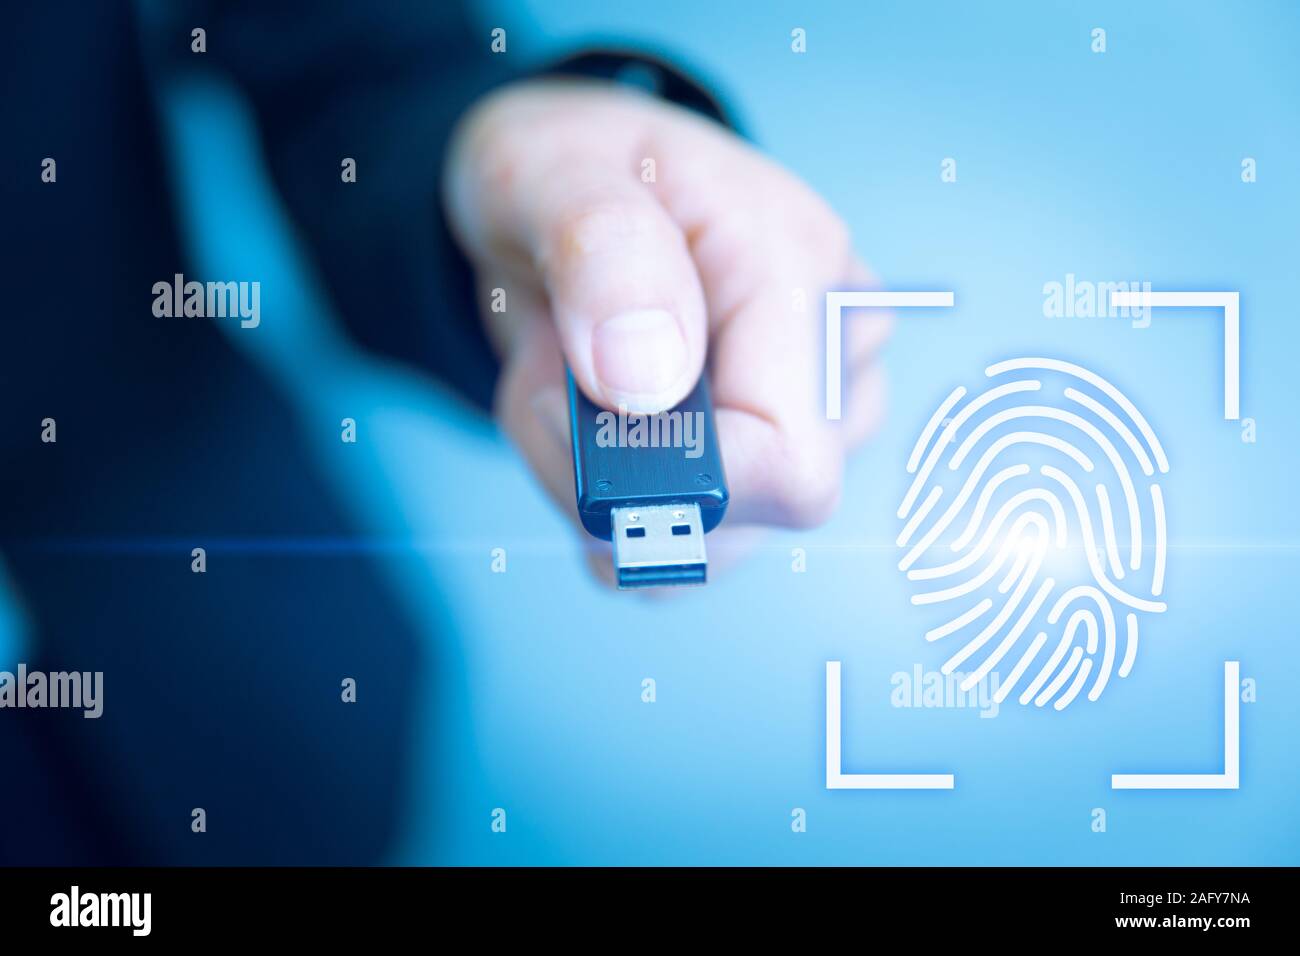 USB Key Lock Access with Fingerprint Biometrics Scanner for future data security technology concept. Stock Photo